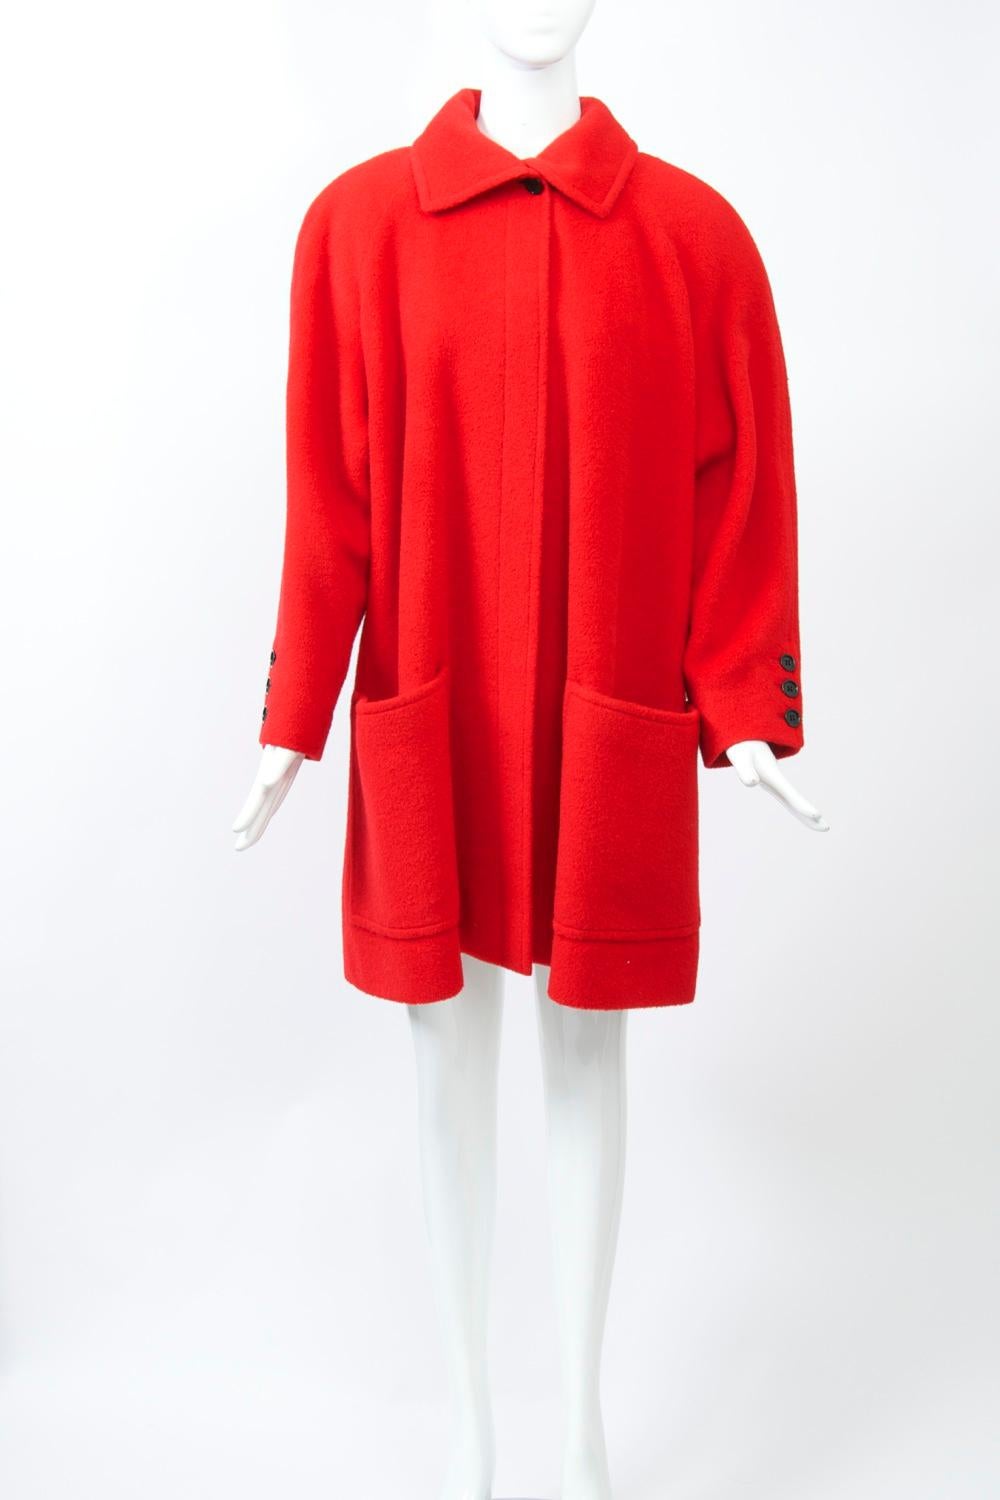 Plush red wool lends this Tiktiner coat its eye-catching quality. The short coat, c.1980s, features a loose cut with deep raglan sleeves, two large patch pockets, a swing back, and a single black button at the neck collar. Three black buttons